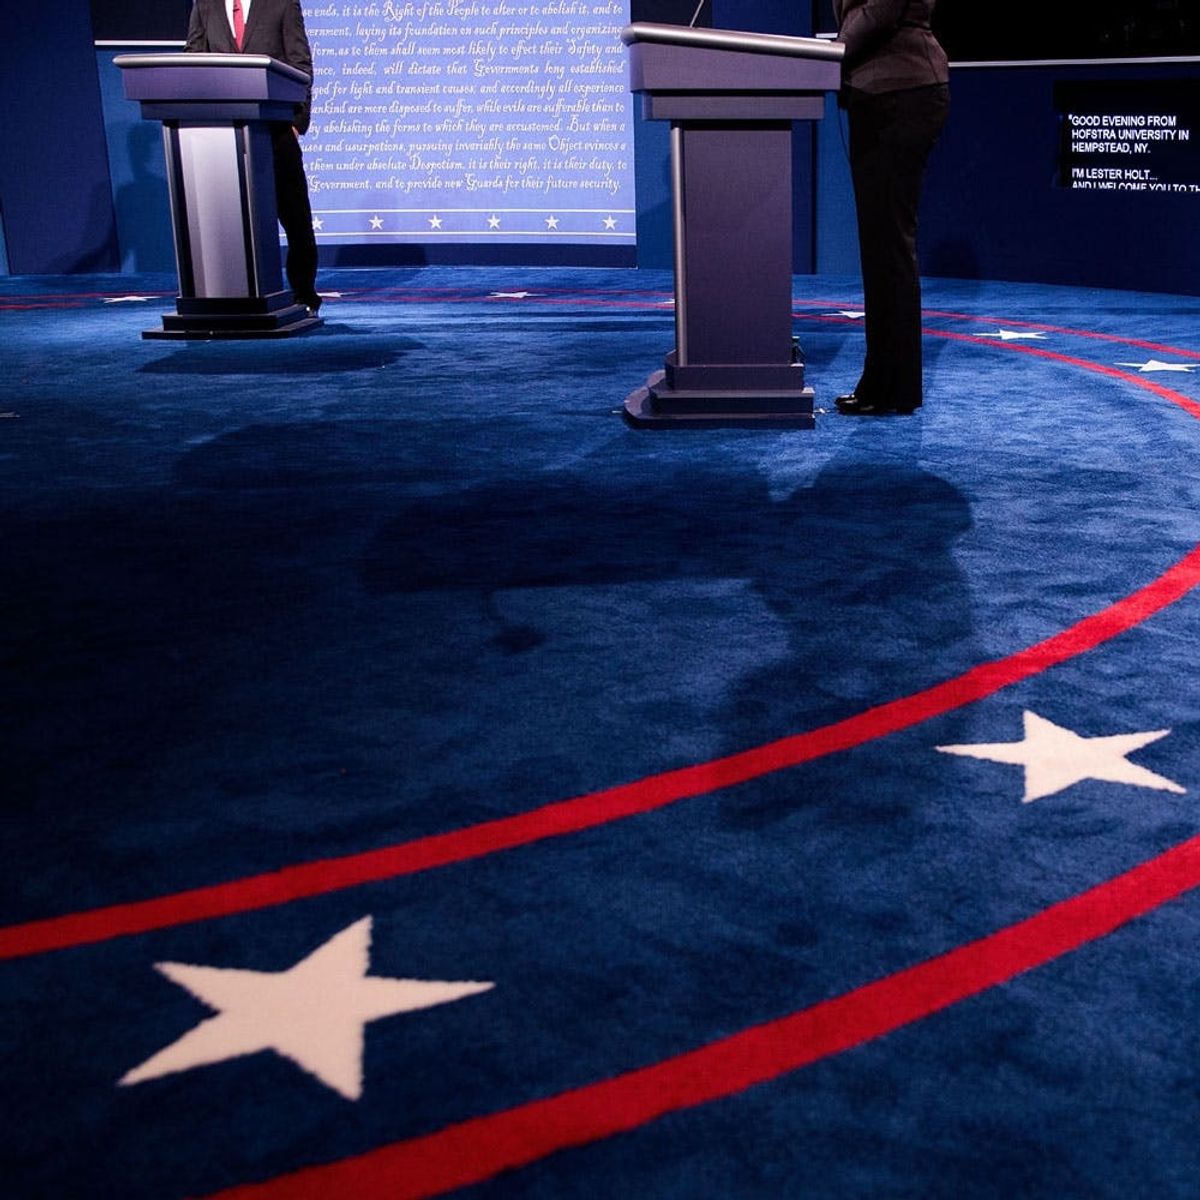 How to Watch Tonight’s Presidential Debate Without a TV